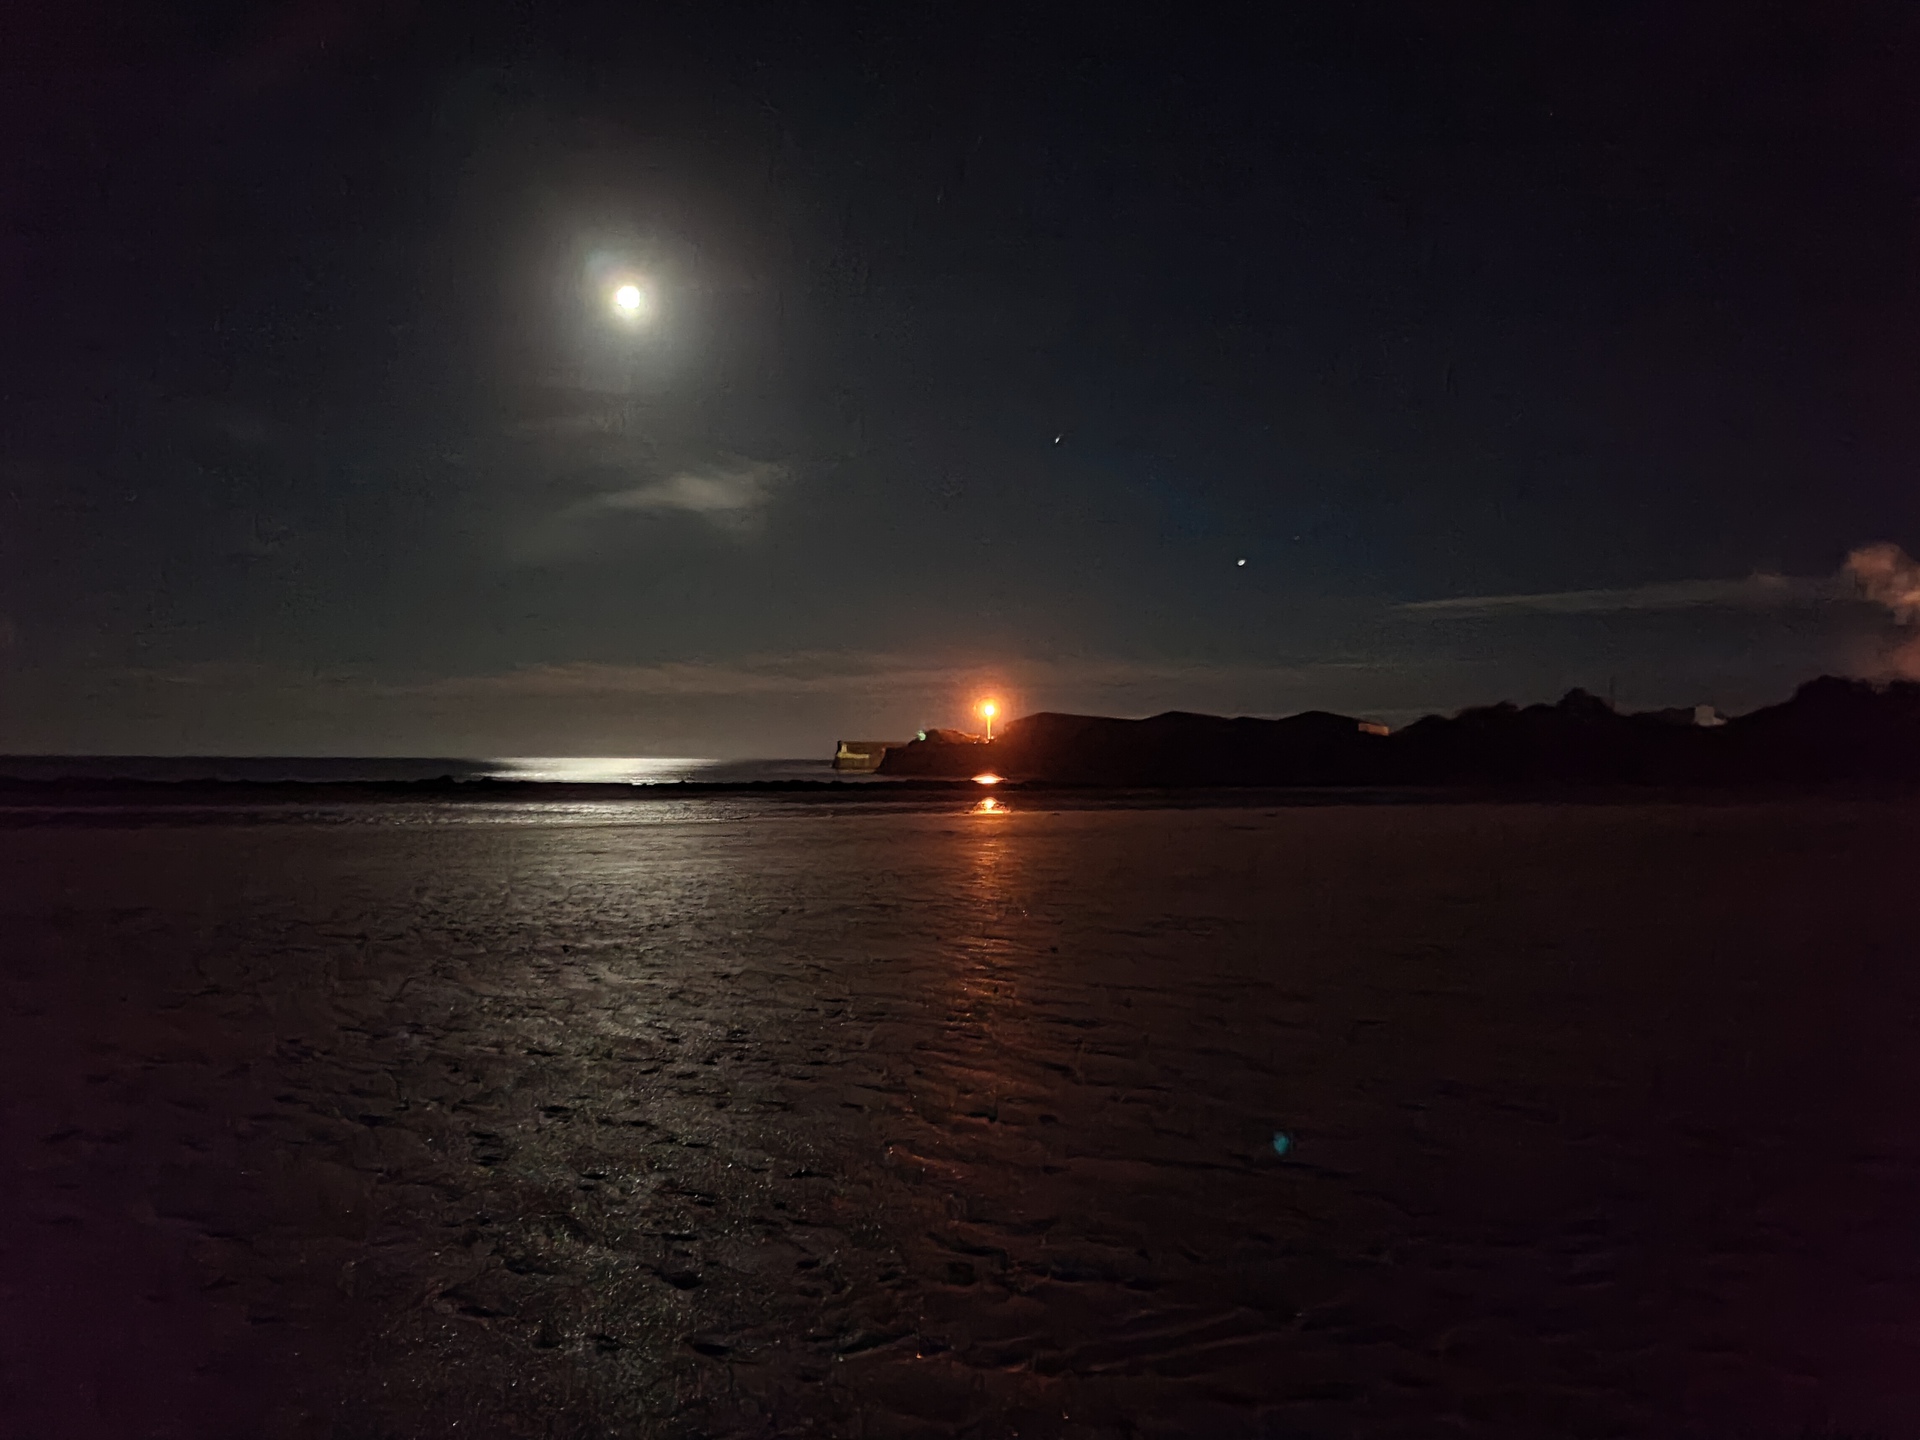 ASUS Zenfone 7 Pro main camera night mode sample of the moon and a light at sea